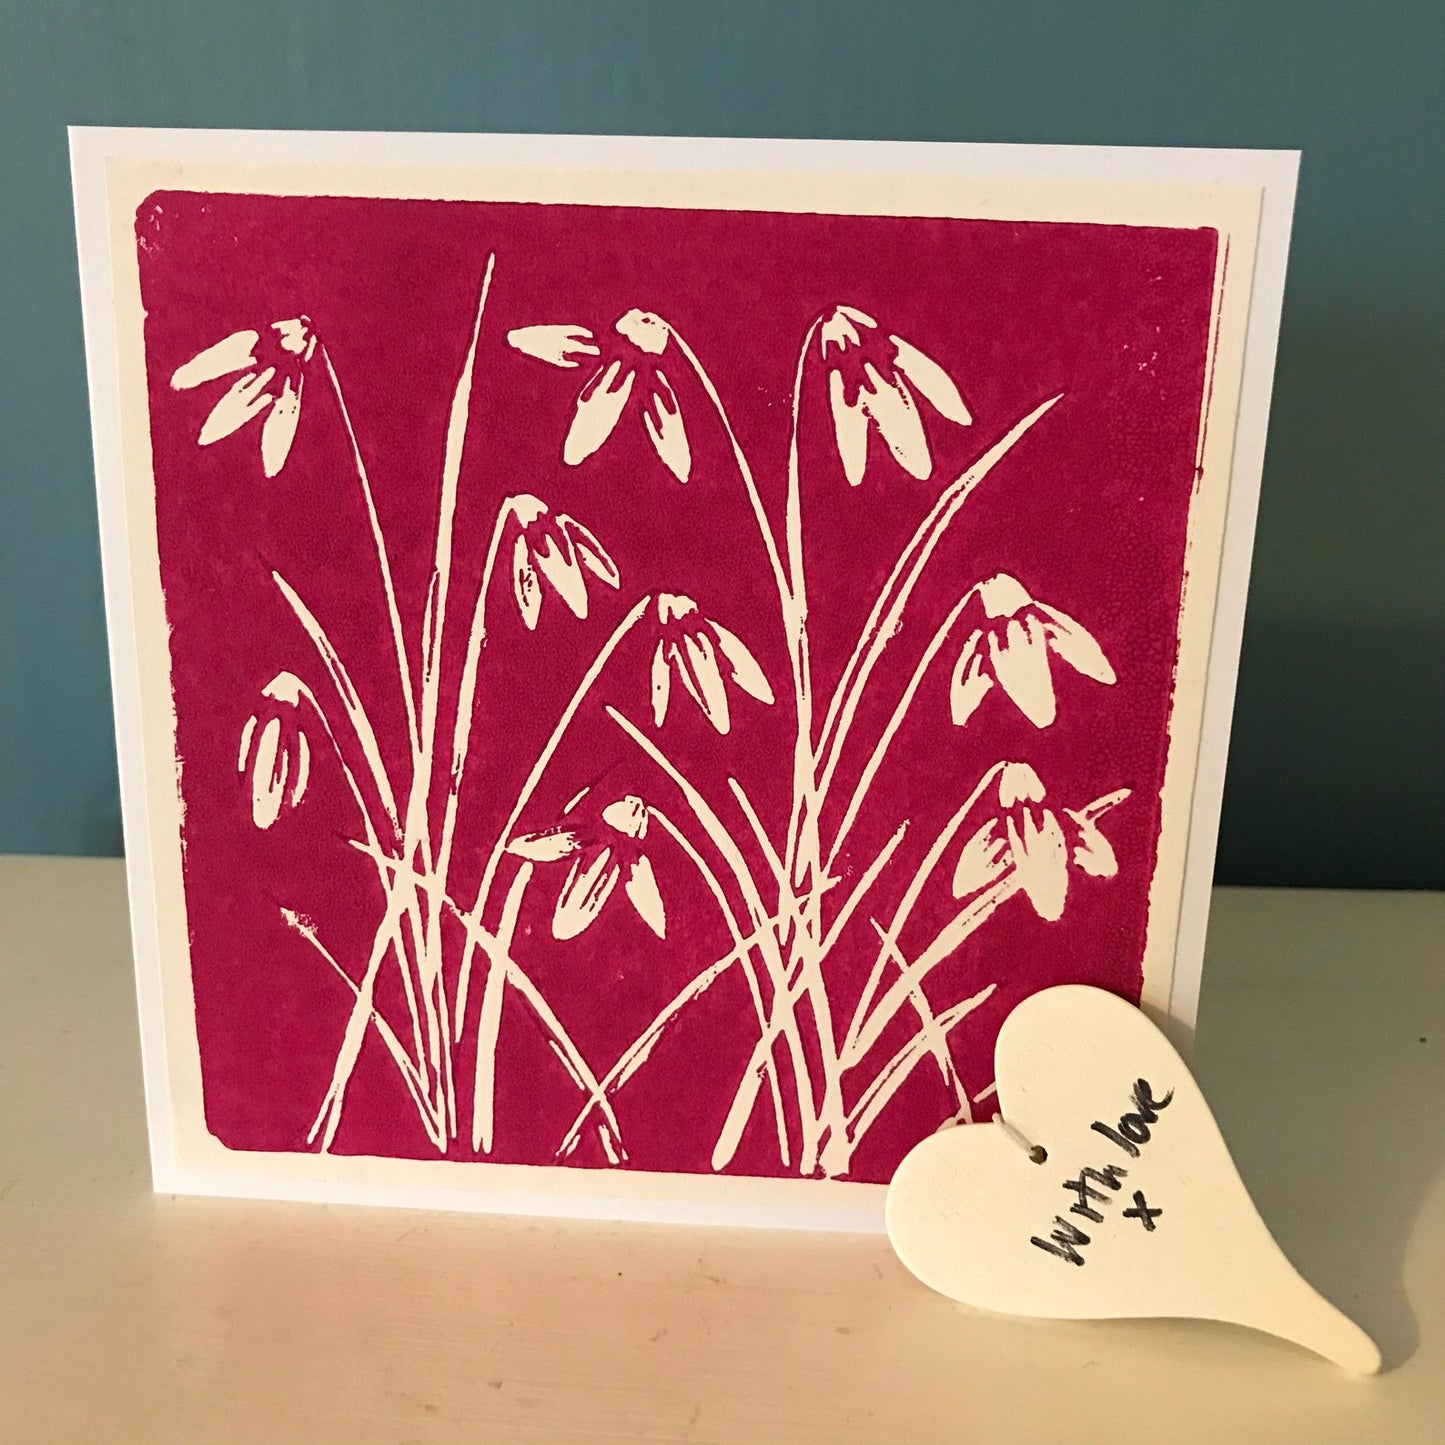 A beautiful handprinted linocut of Snowdrops, in cyan blue or magenta. A handmade greetings card for any occasion, left blank inside for your own message.